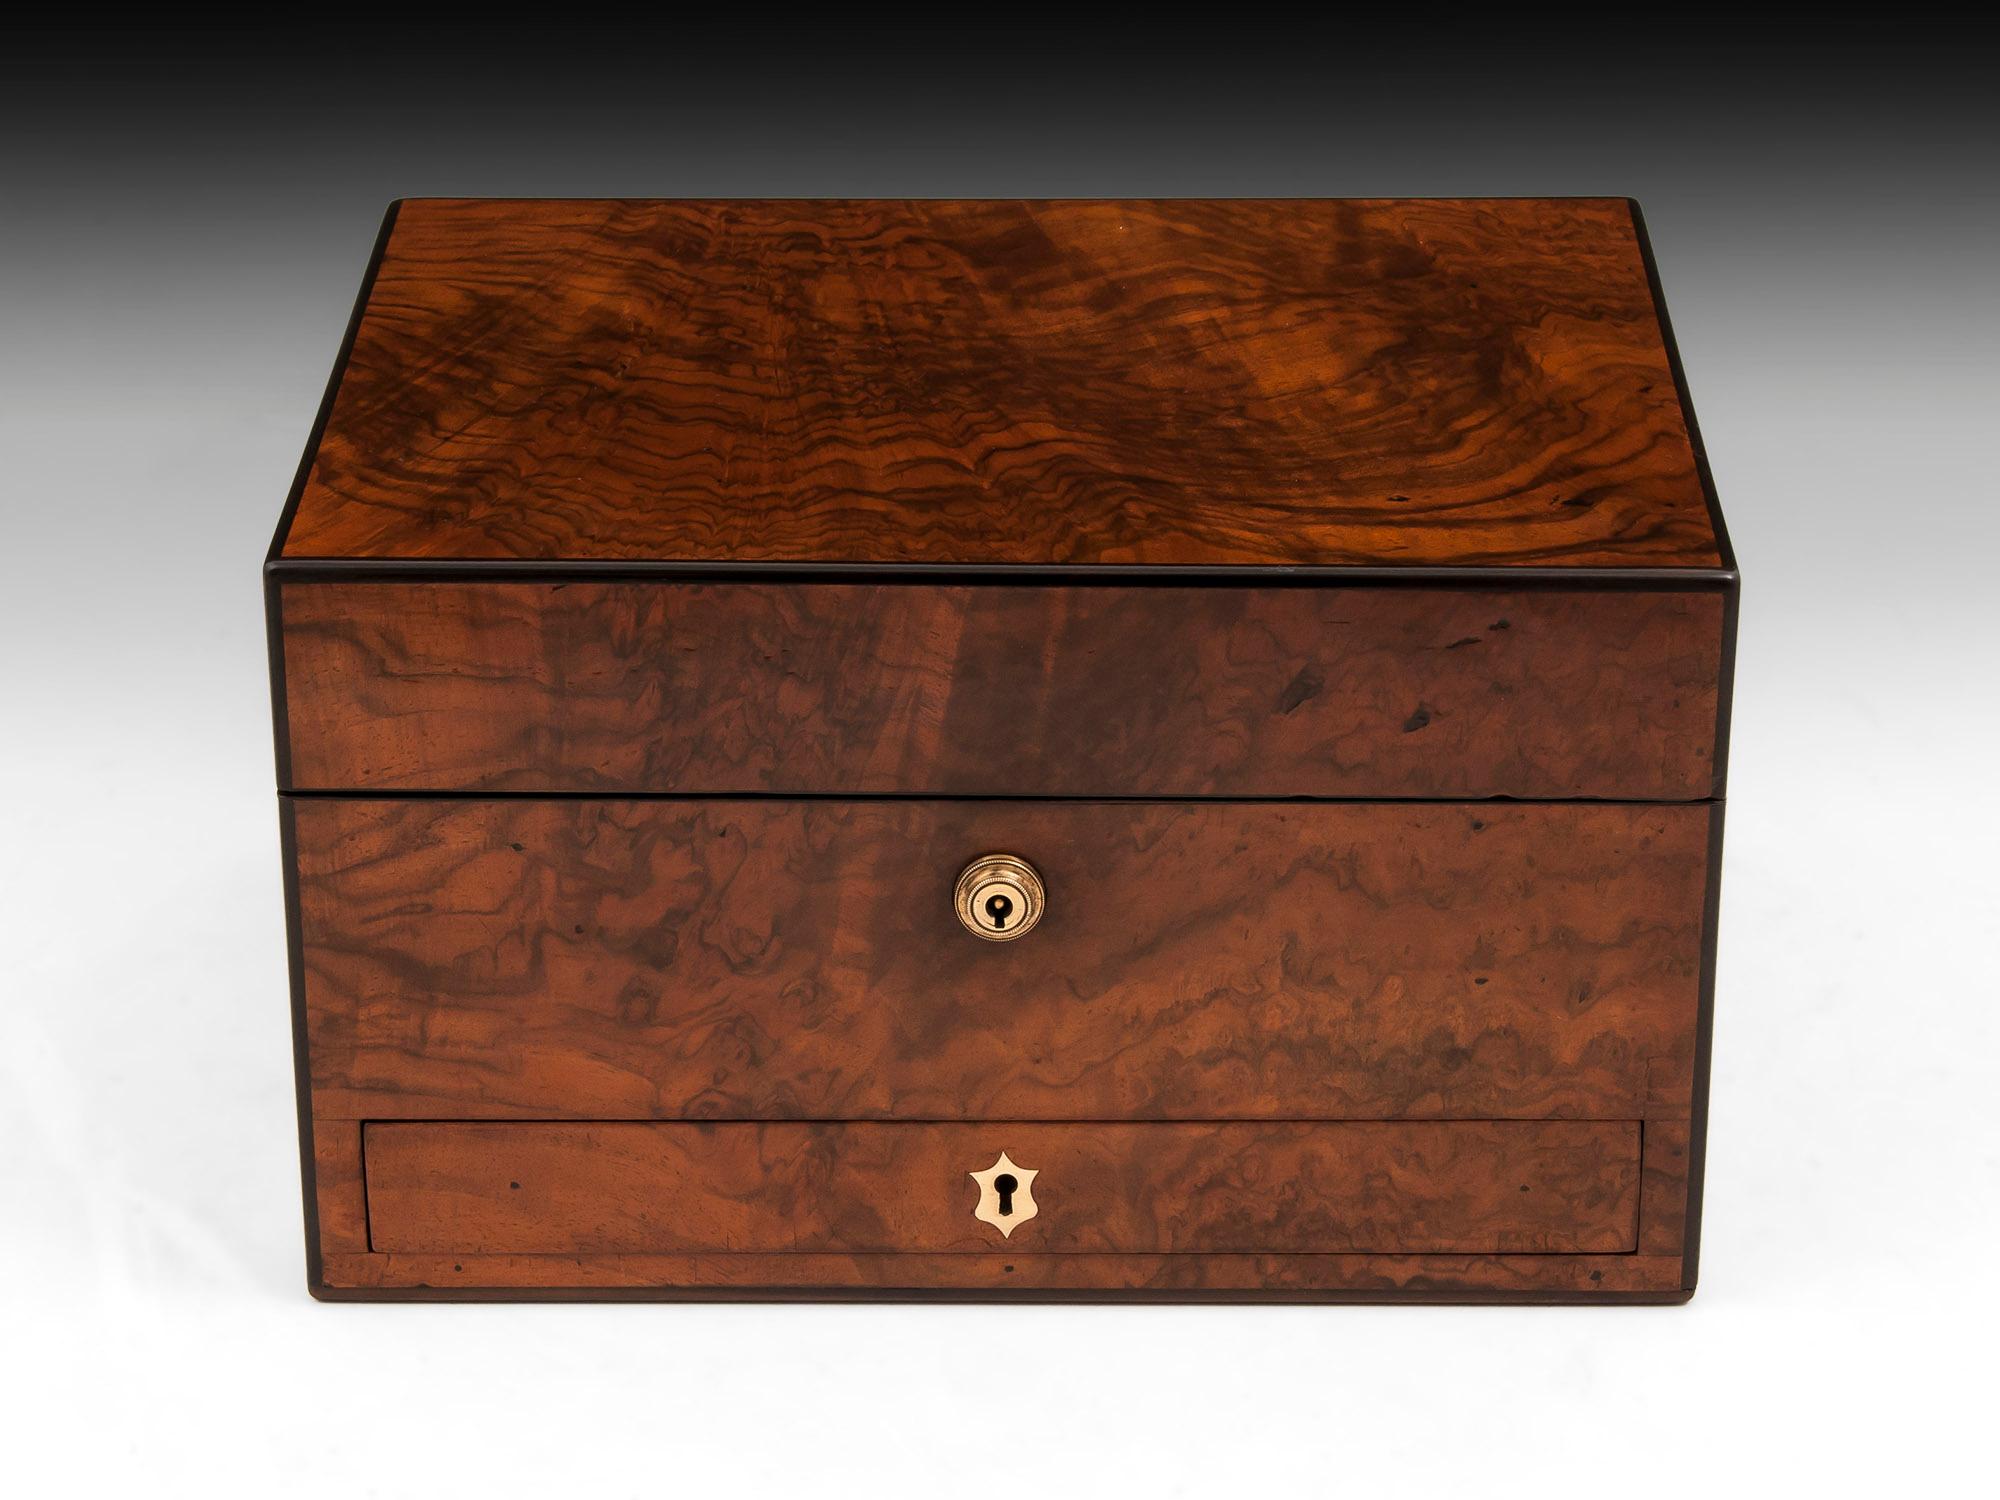 Beautiful figured walnut jewelry box with ebony edging and brass escutcheons. 

The interior of this jewelry box is lined with maroon velvet and silk paper and features a removable tray with several compartments including one for rings, earrings